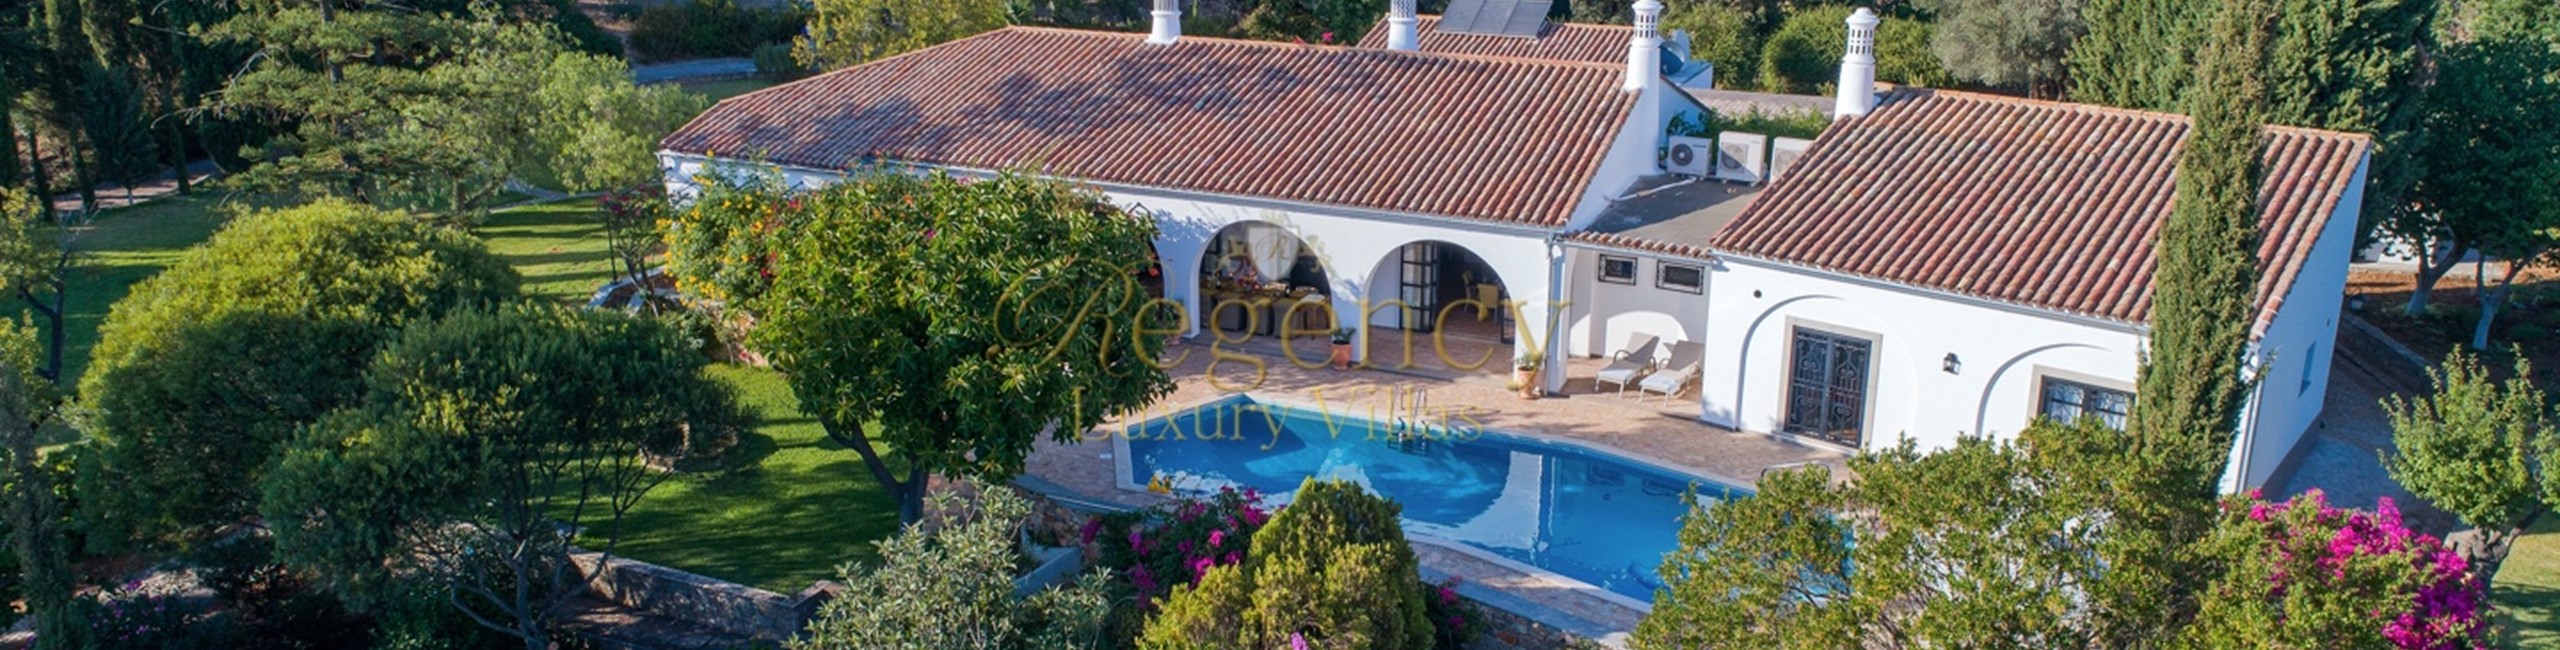 Villa To Rent 5 Bed In Bordeira Portugal